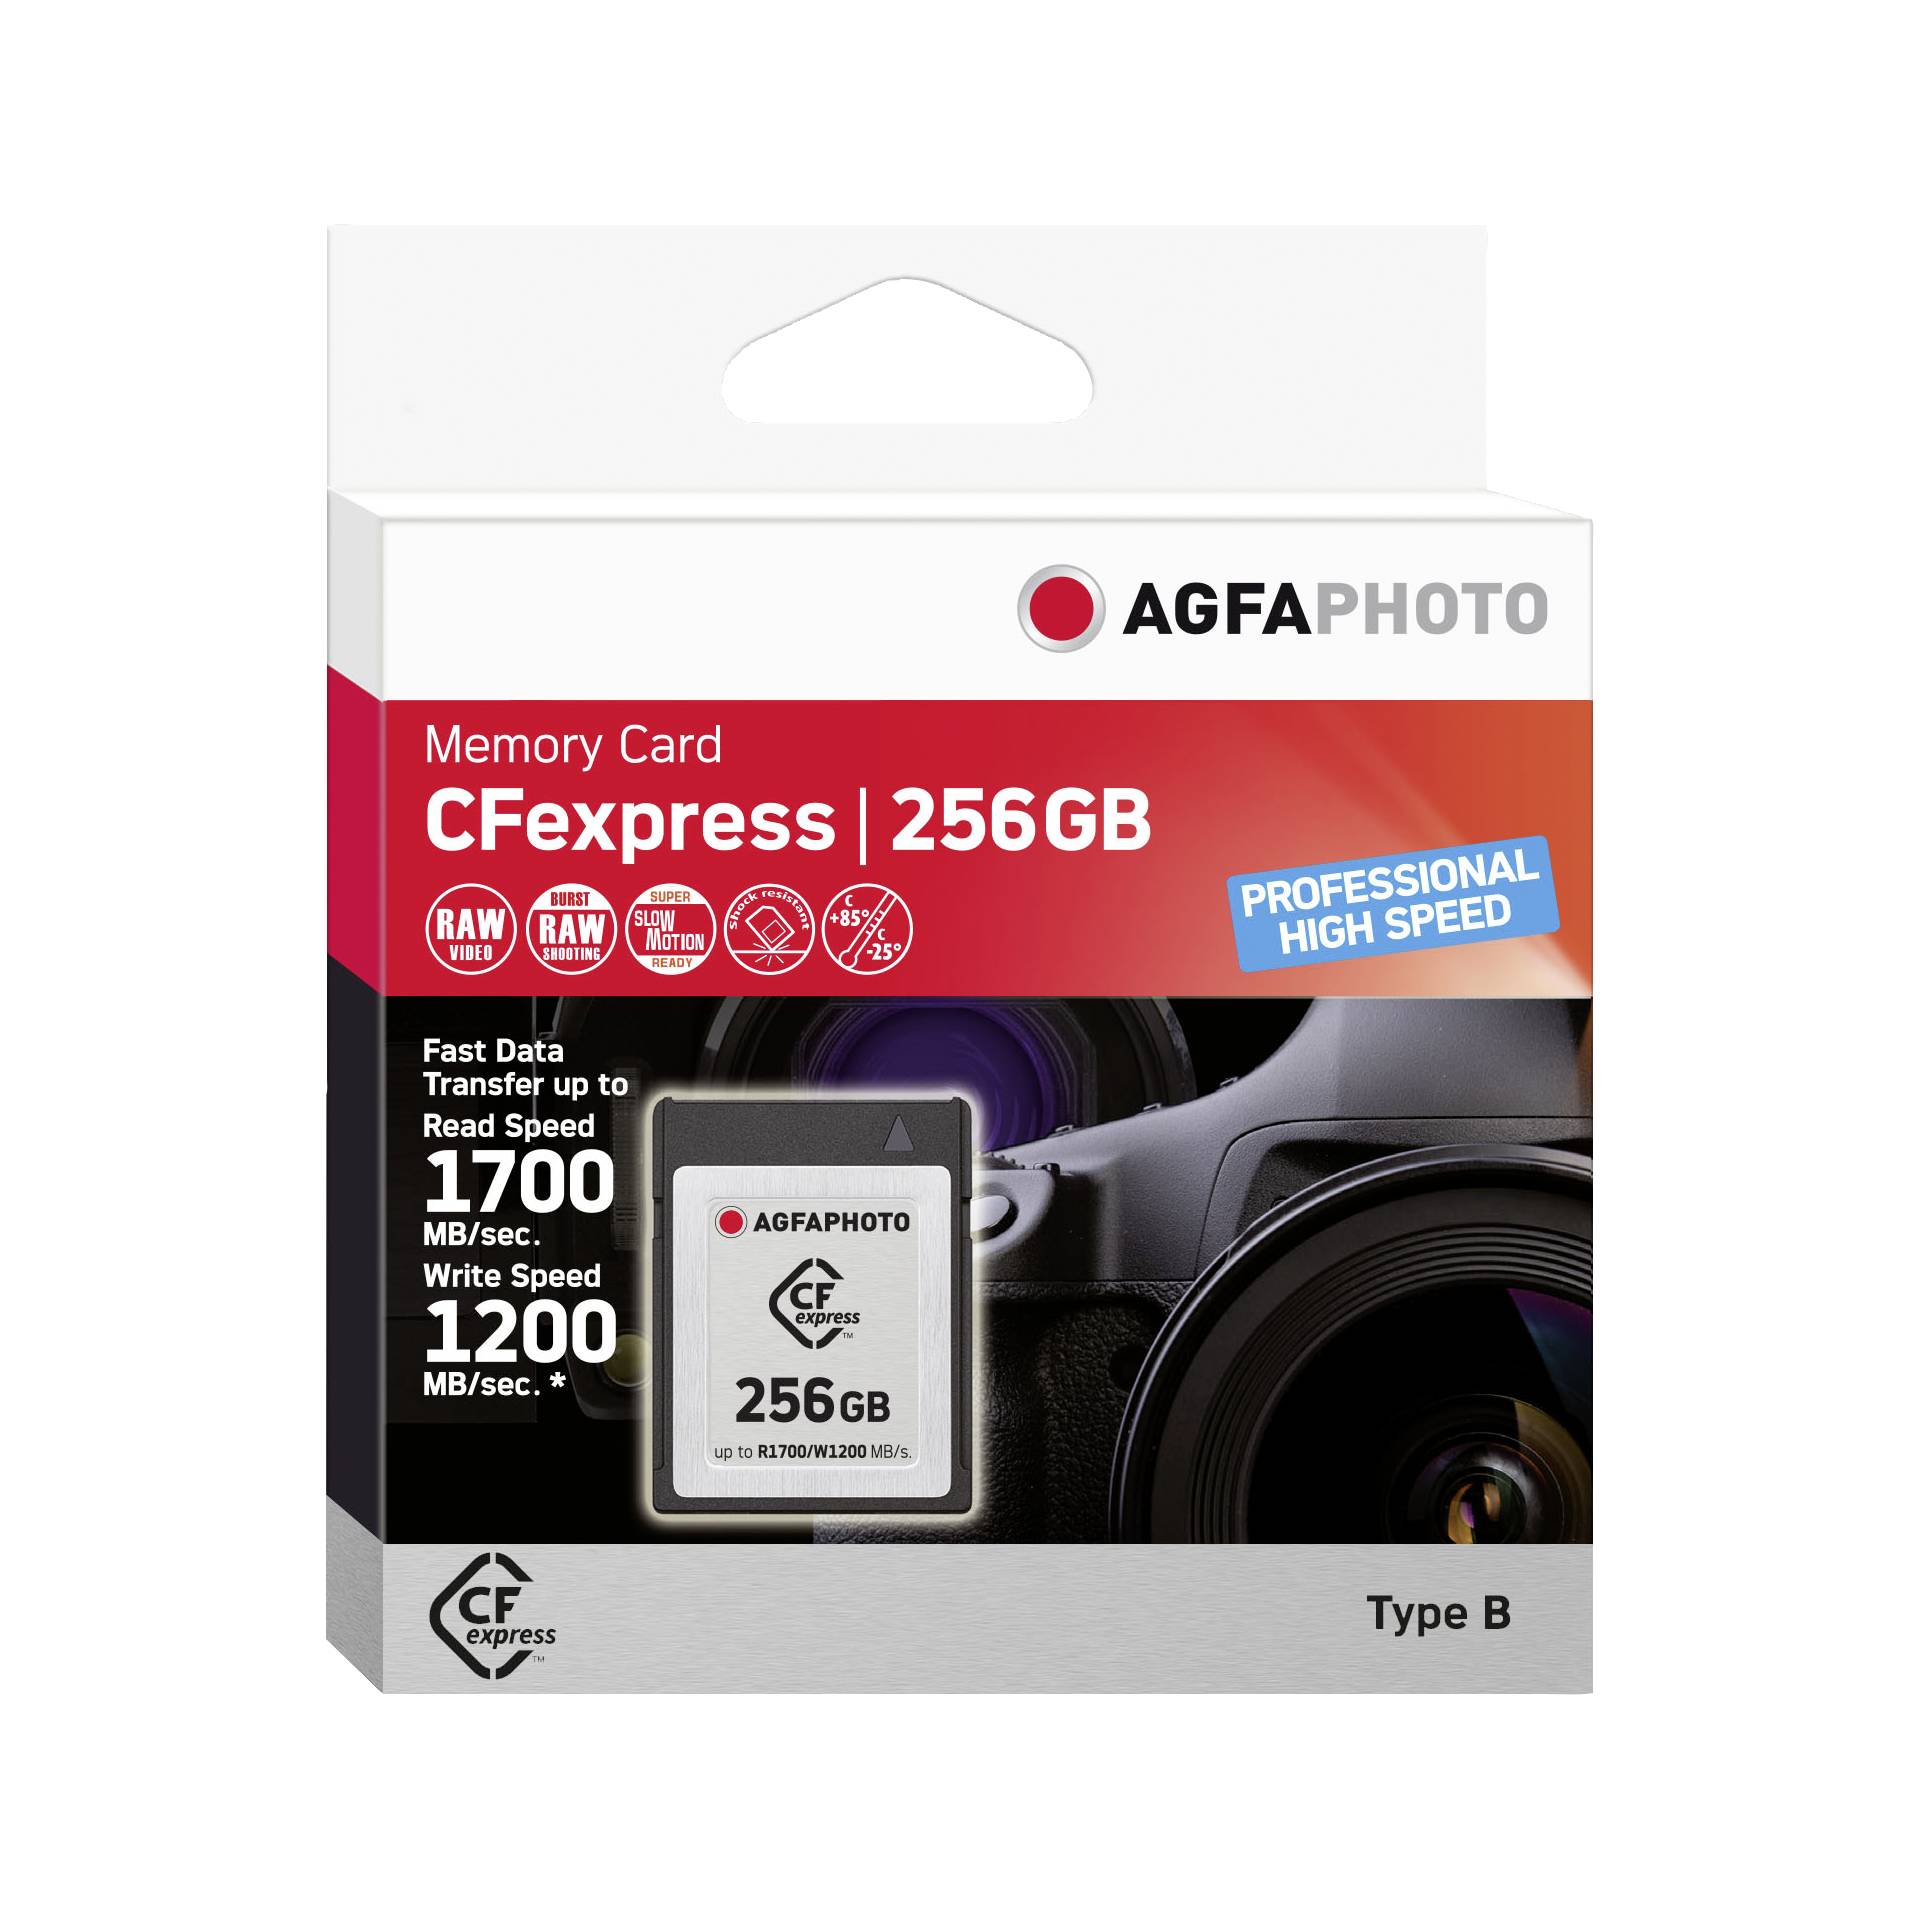 AgfaPhoto CFexpress        256GB Professional High Speed